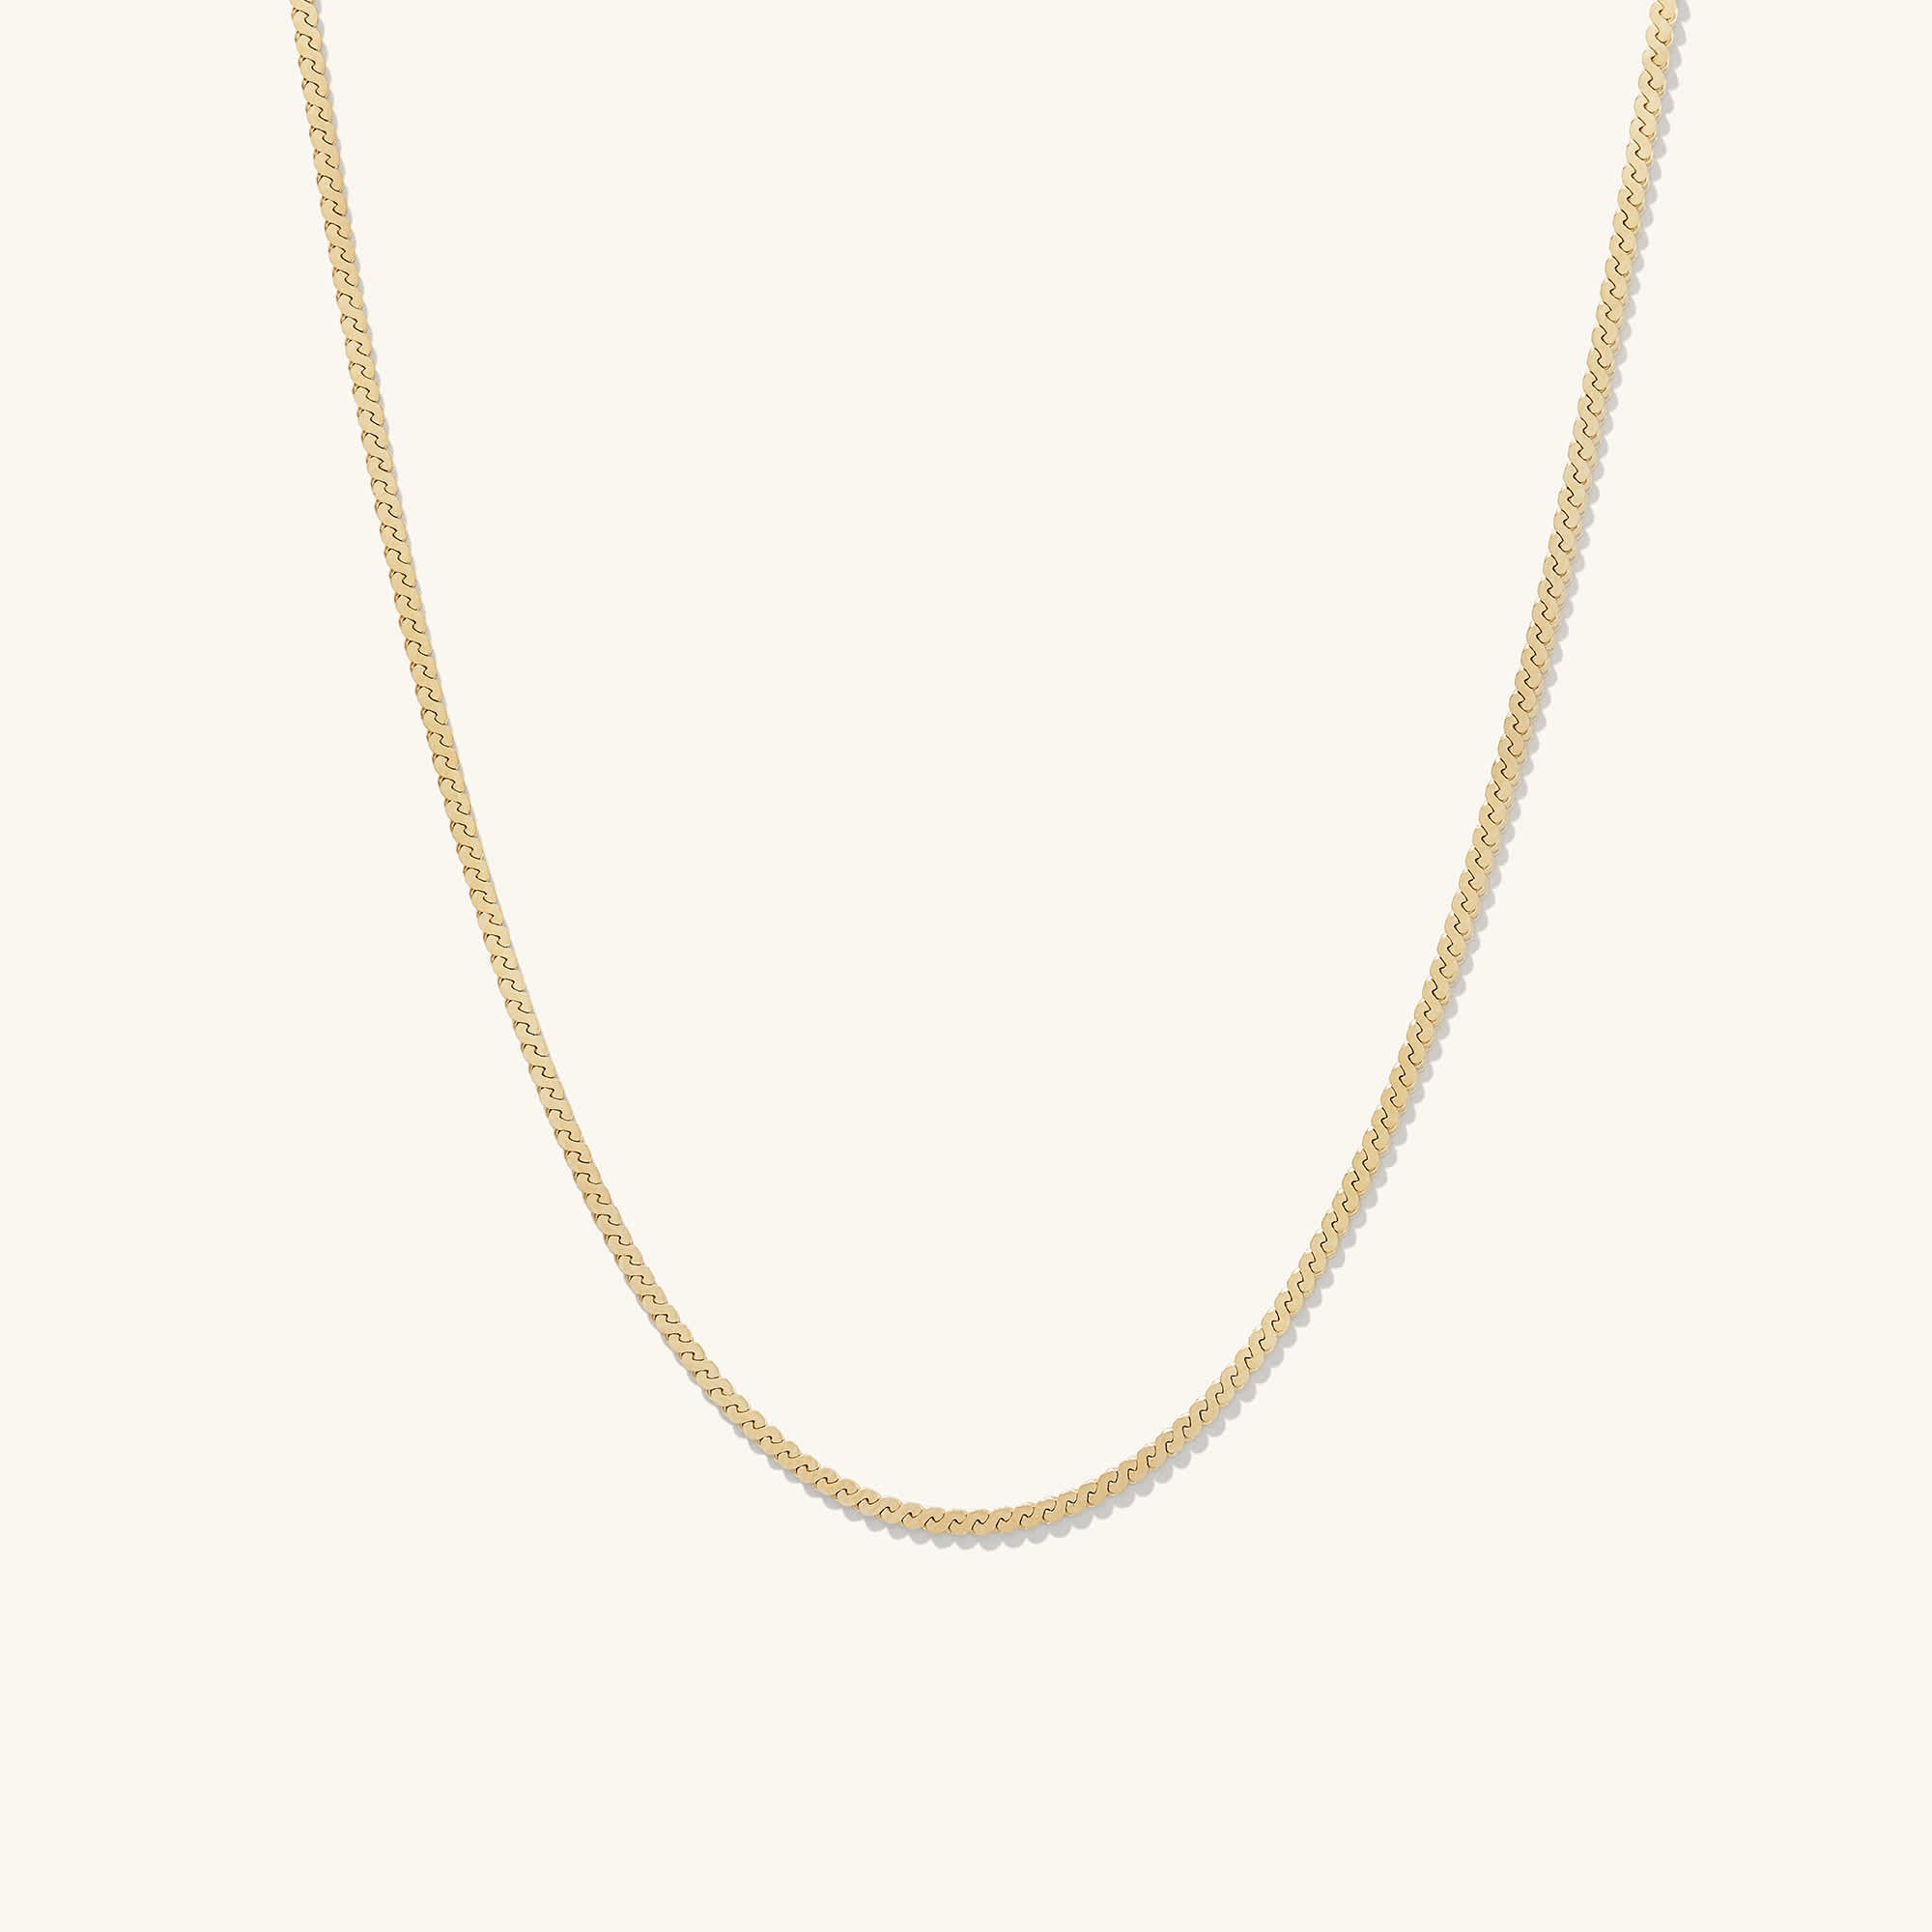 Rope Chain Necklace : Handcrafted in Gold Vermeil | Mejuri | Mejuri (Global)